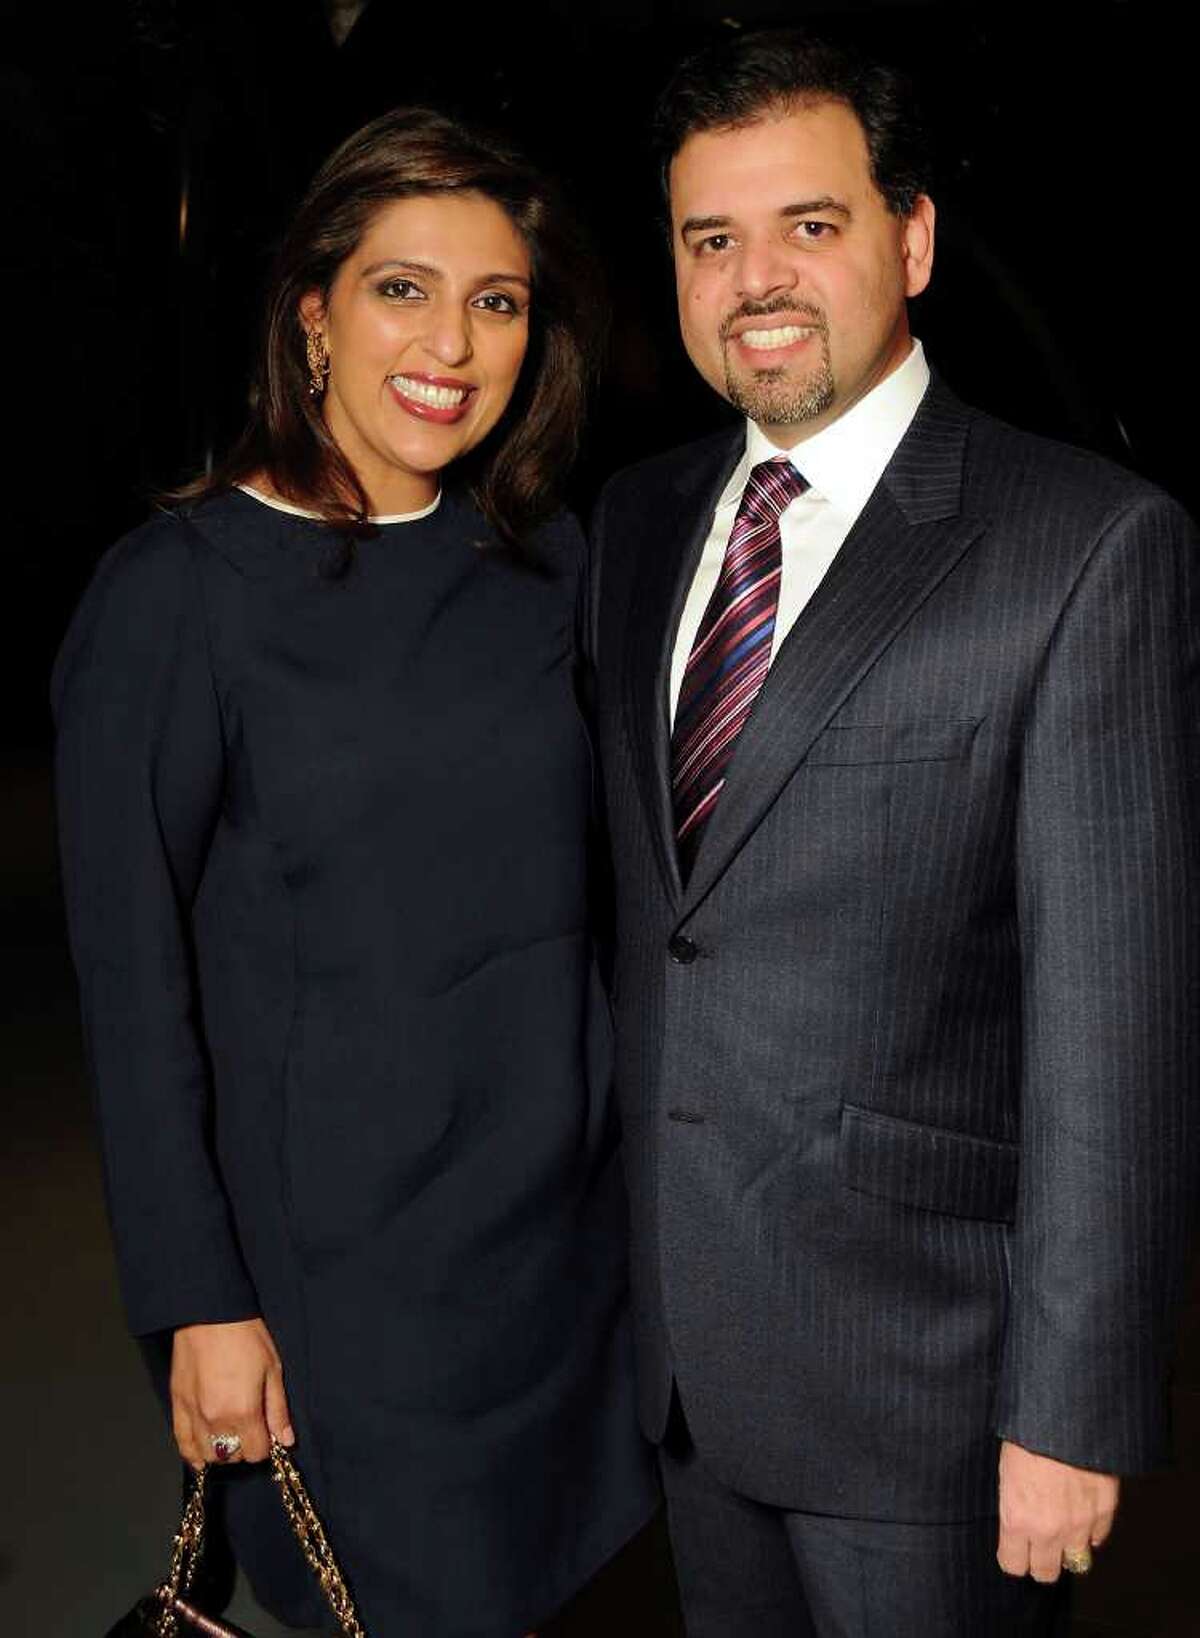 Nidhika and Pershant Mehta hosted a patron's preview party at the new Asia Society Texas Center Building.